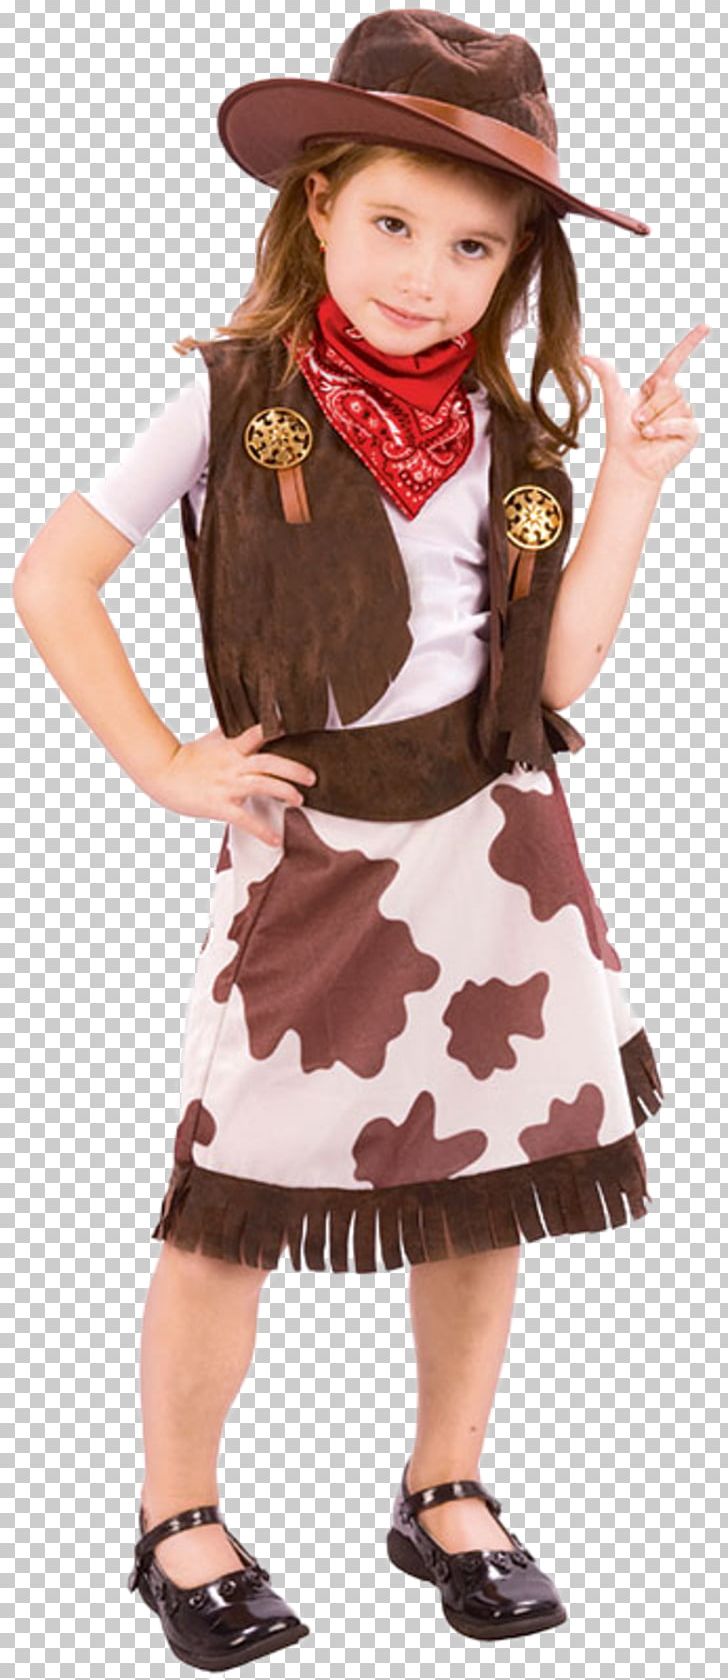 Costume Party Cowboy Disguise Dress PNG, Clipart, Child, Clothing, Costume, Costume Party, Cowboy Free PNG Download